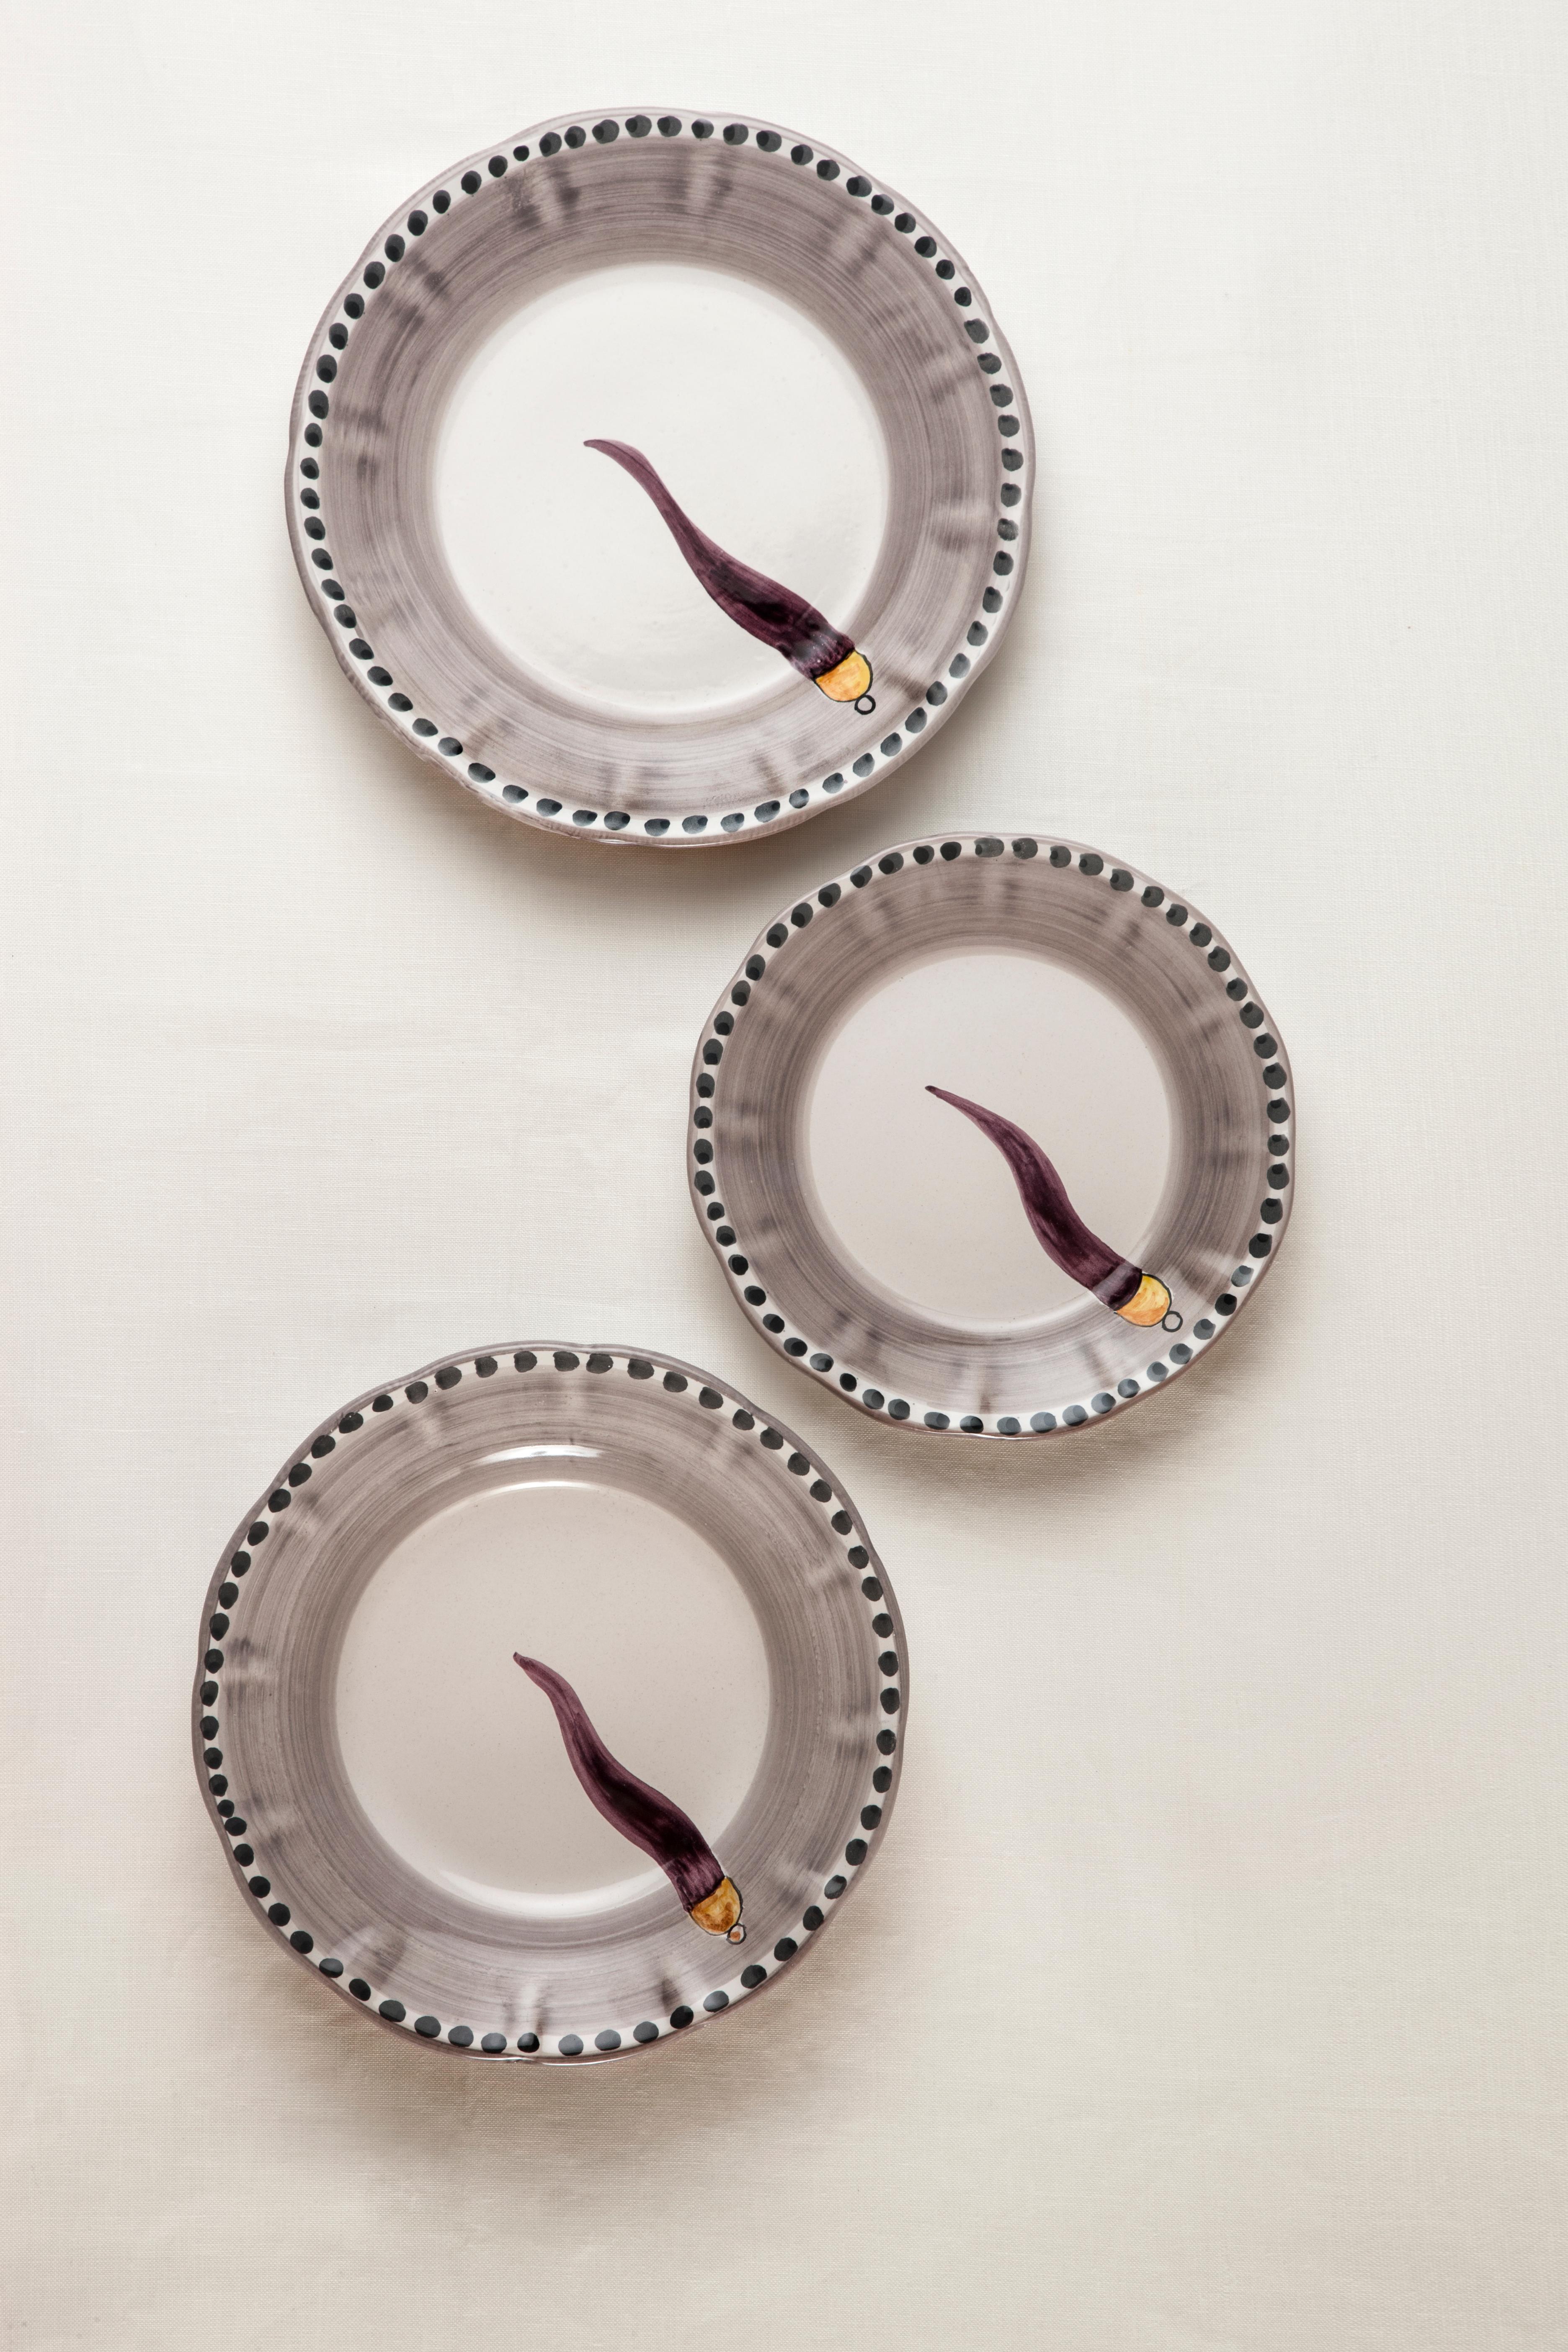 Contemporary 21st Century Hand Made Vietri Ceramic Side Plate in Purple White Made in Italy For Sale